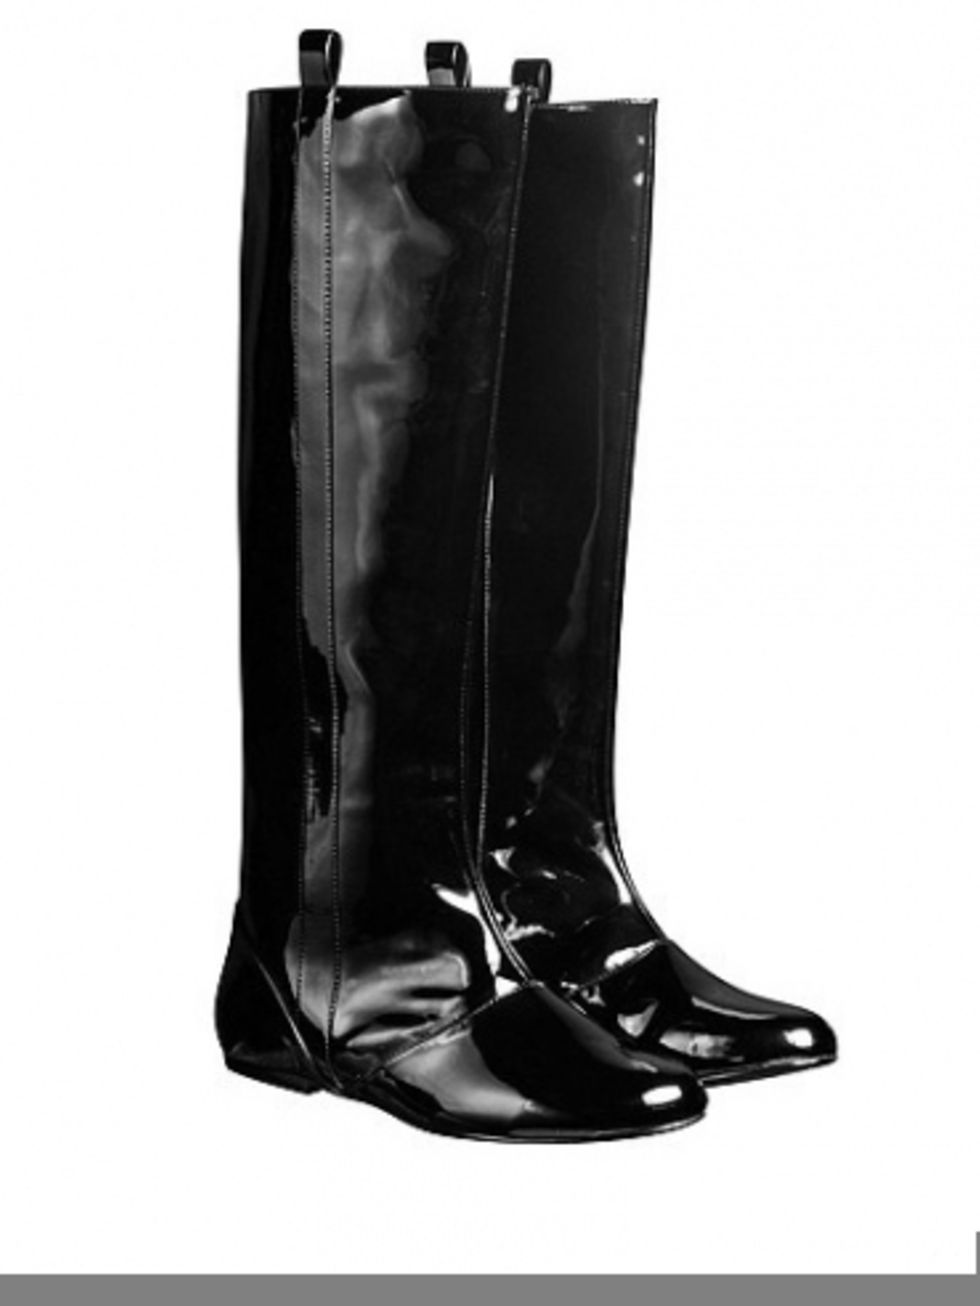 Boot, Black, Leather, Knee-high boot, Riding boot, Motorcycle boot, 